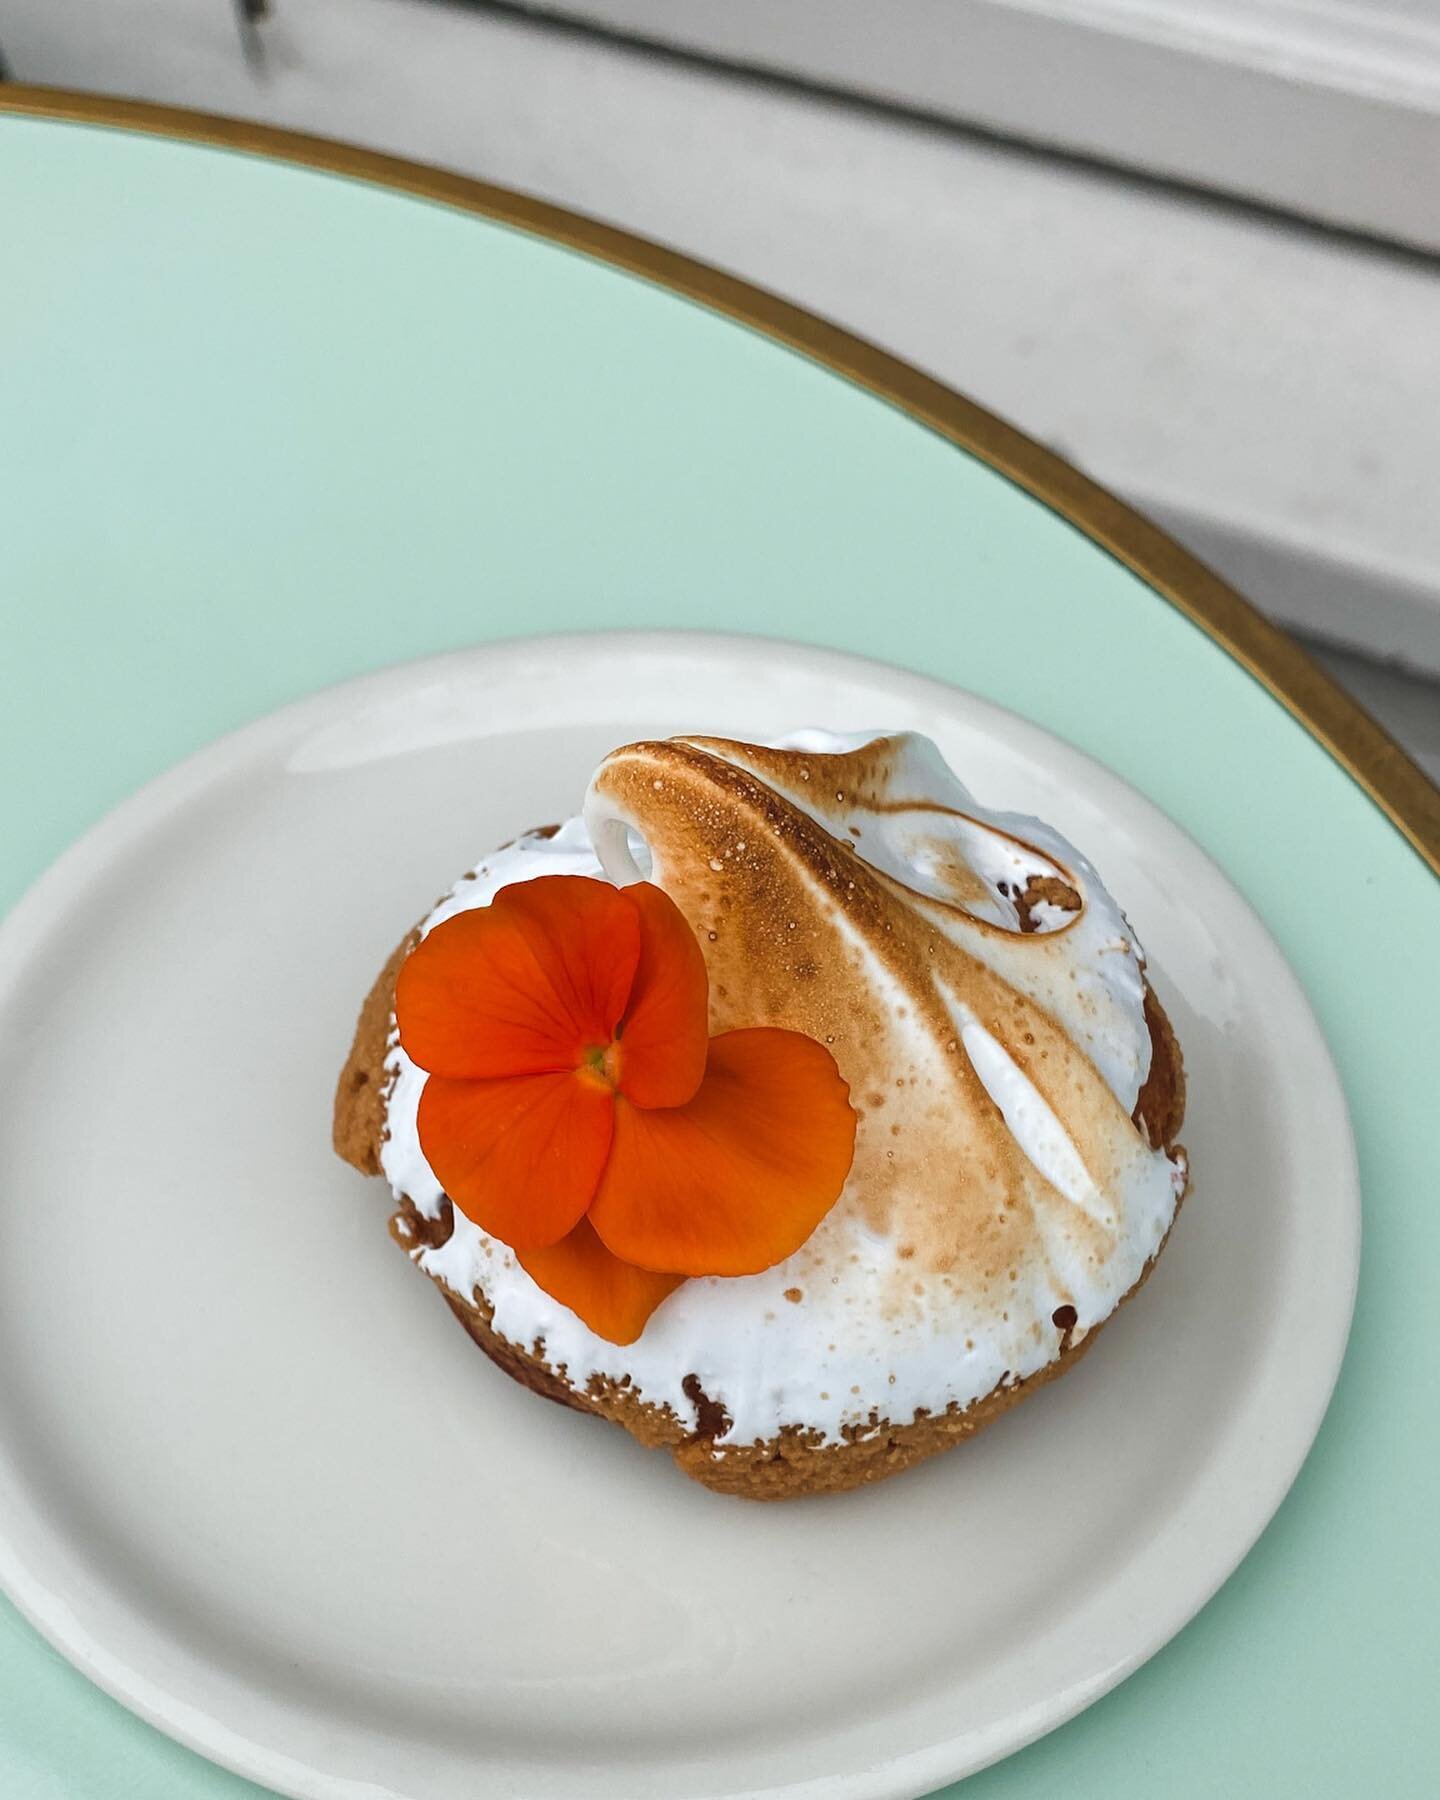 We saw how much you liked the lemon curd choux so we put a torched meringue hat on it and edible flowers because if the weather refuses to be Summer, we'll make our own little rays of sun.